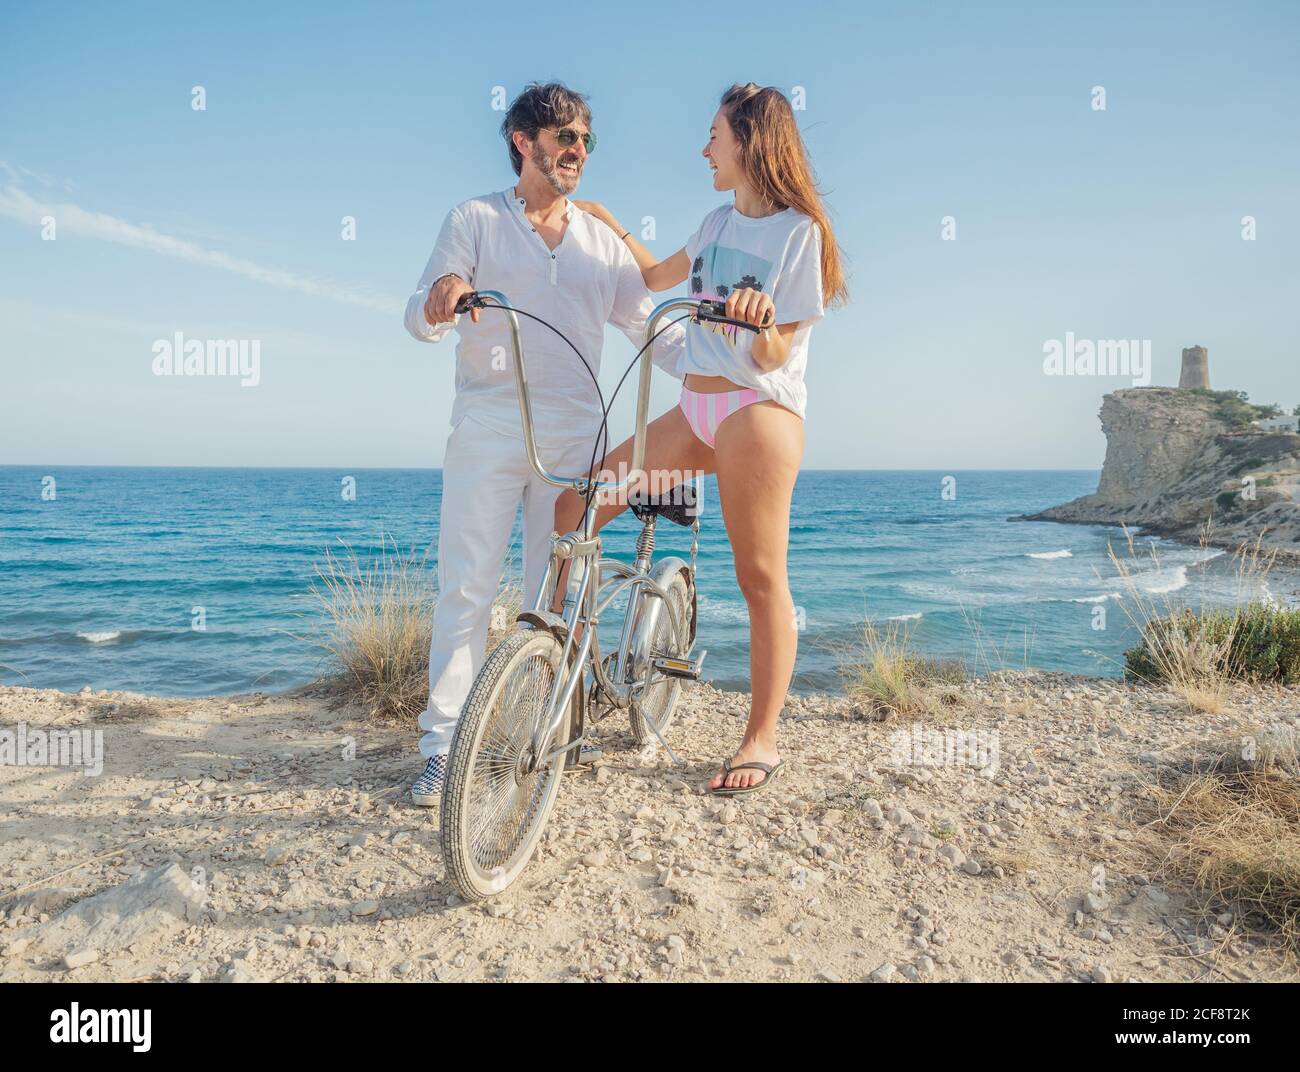 Stylish man and young Woman standing at seashore with bicycle enjoying amazing seascape in bright day Stock Photo